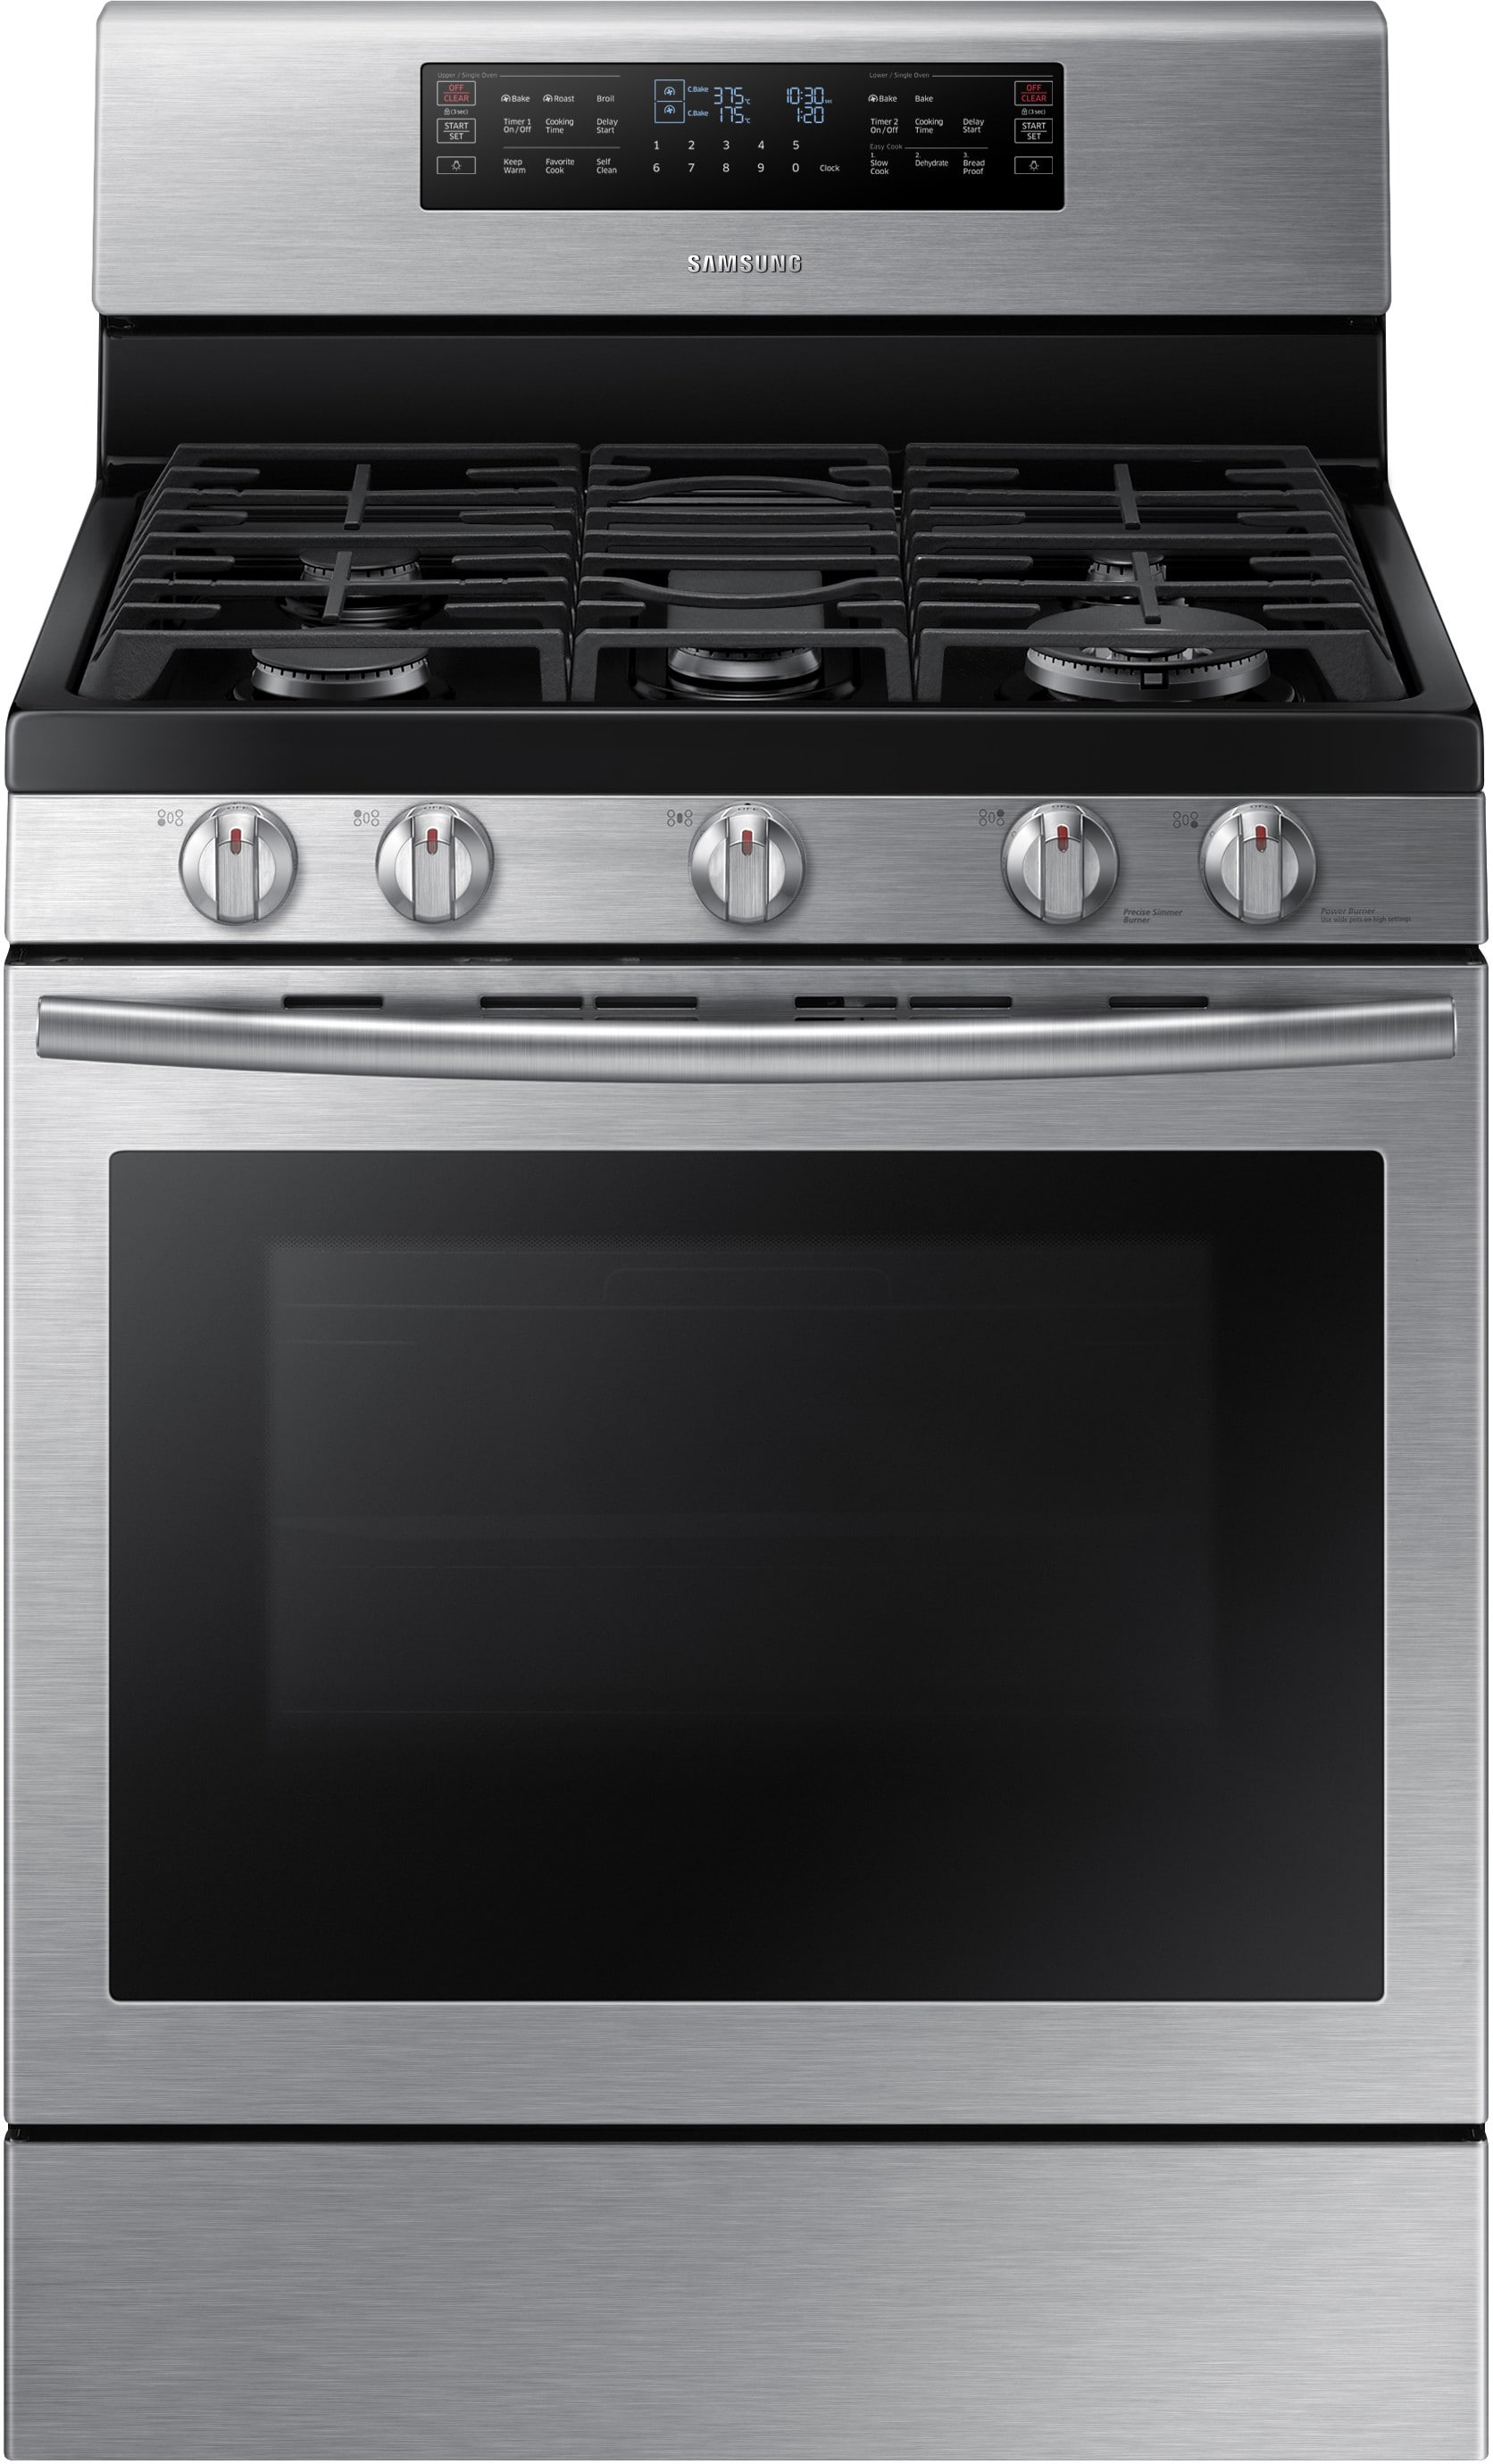 samsung-nx58j7750ss-30-inch-flex-duo-gas-range-with-5-8-cu-ft-oven